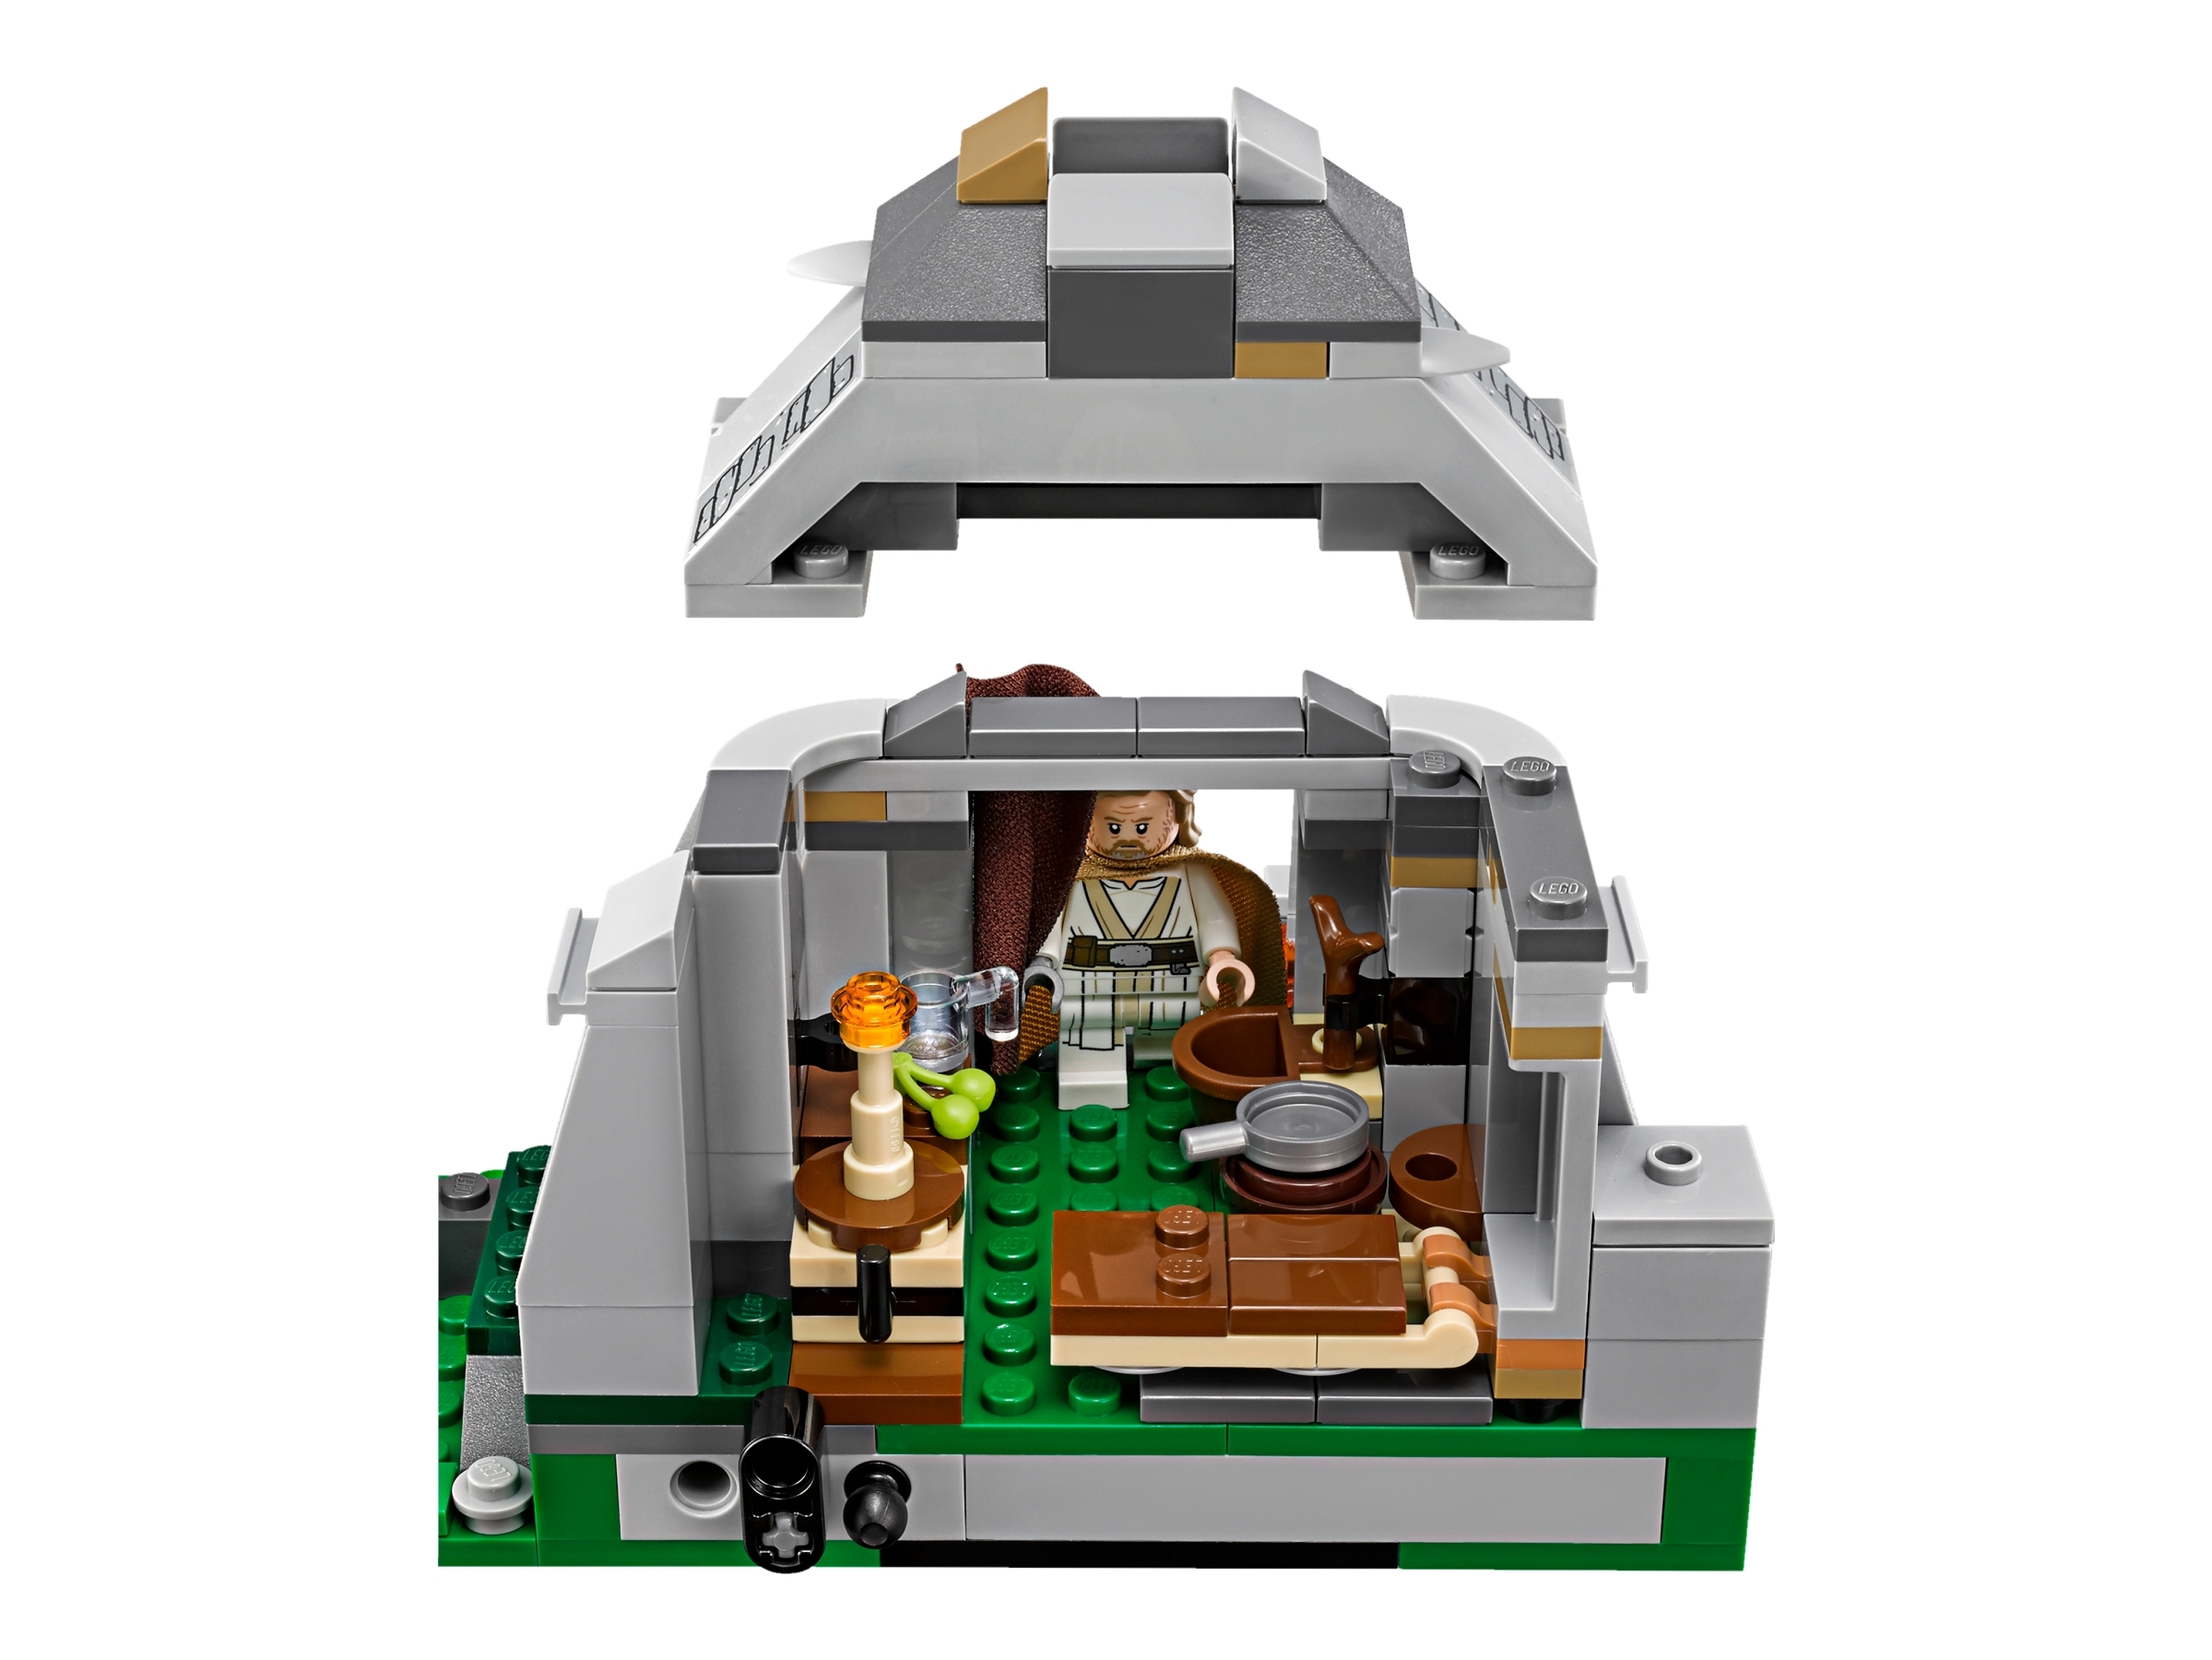  LEGO Star Wars: The Last Jedi Ahch-To Island Training 75200  Building Kit (241 Pieces) (Discontinued by Manufacturer) : Toys & Games